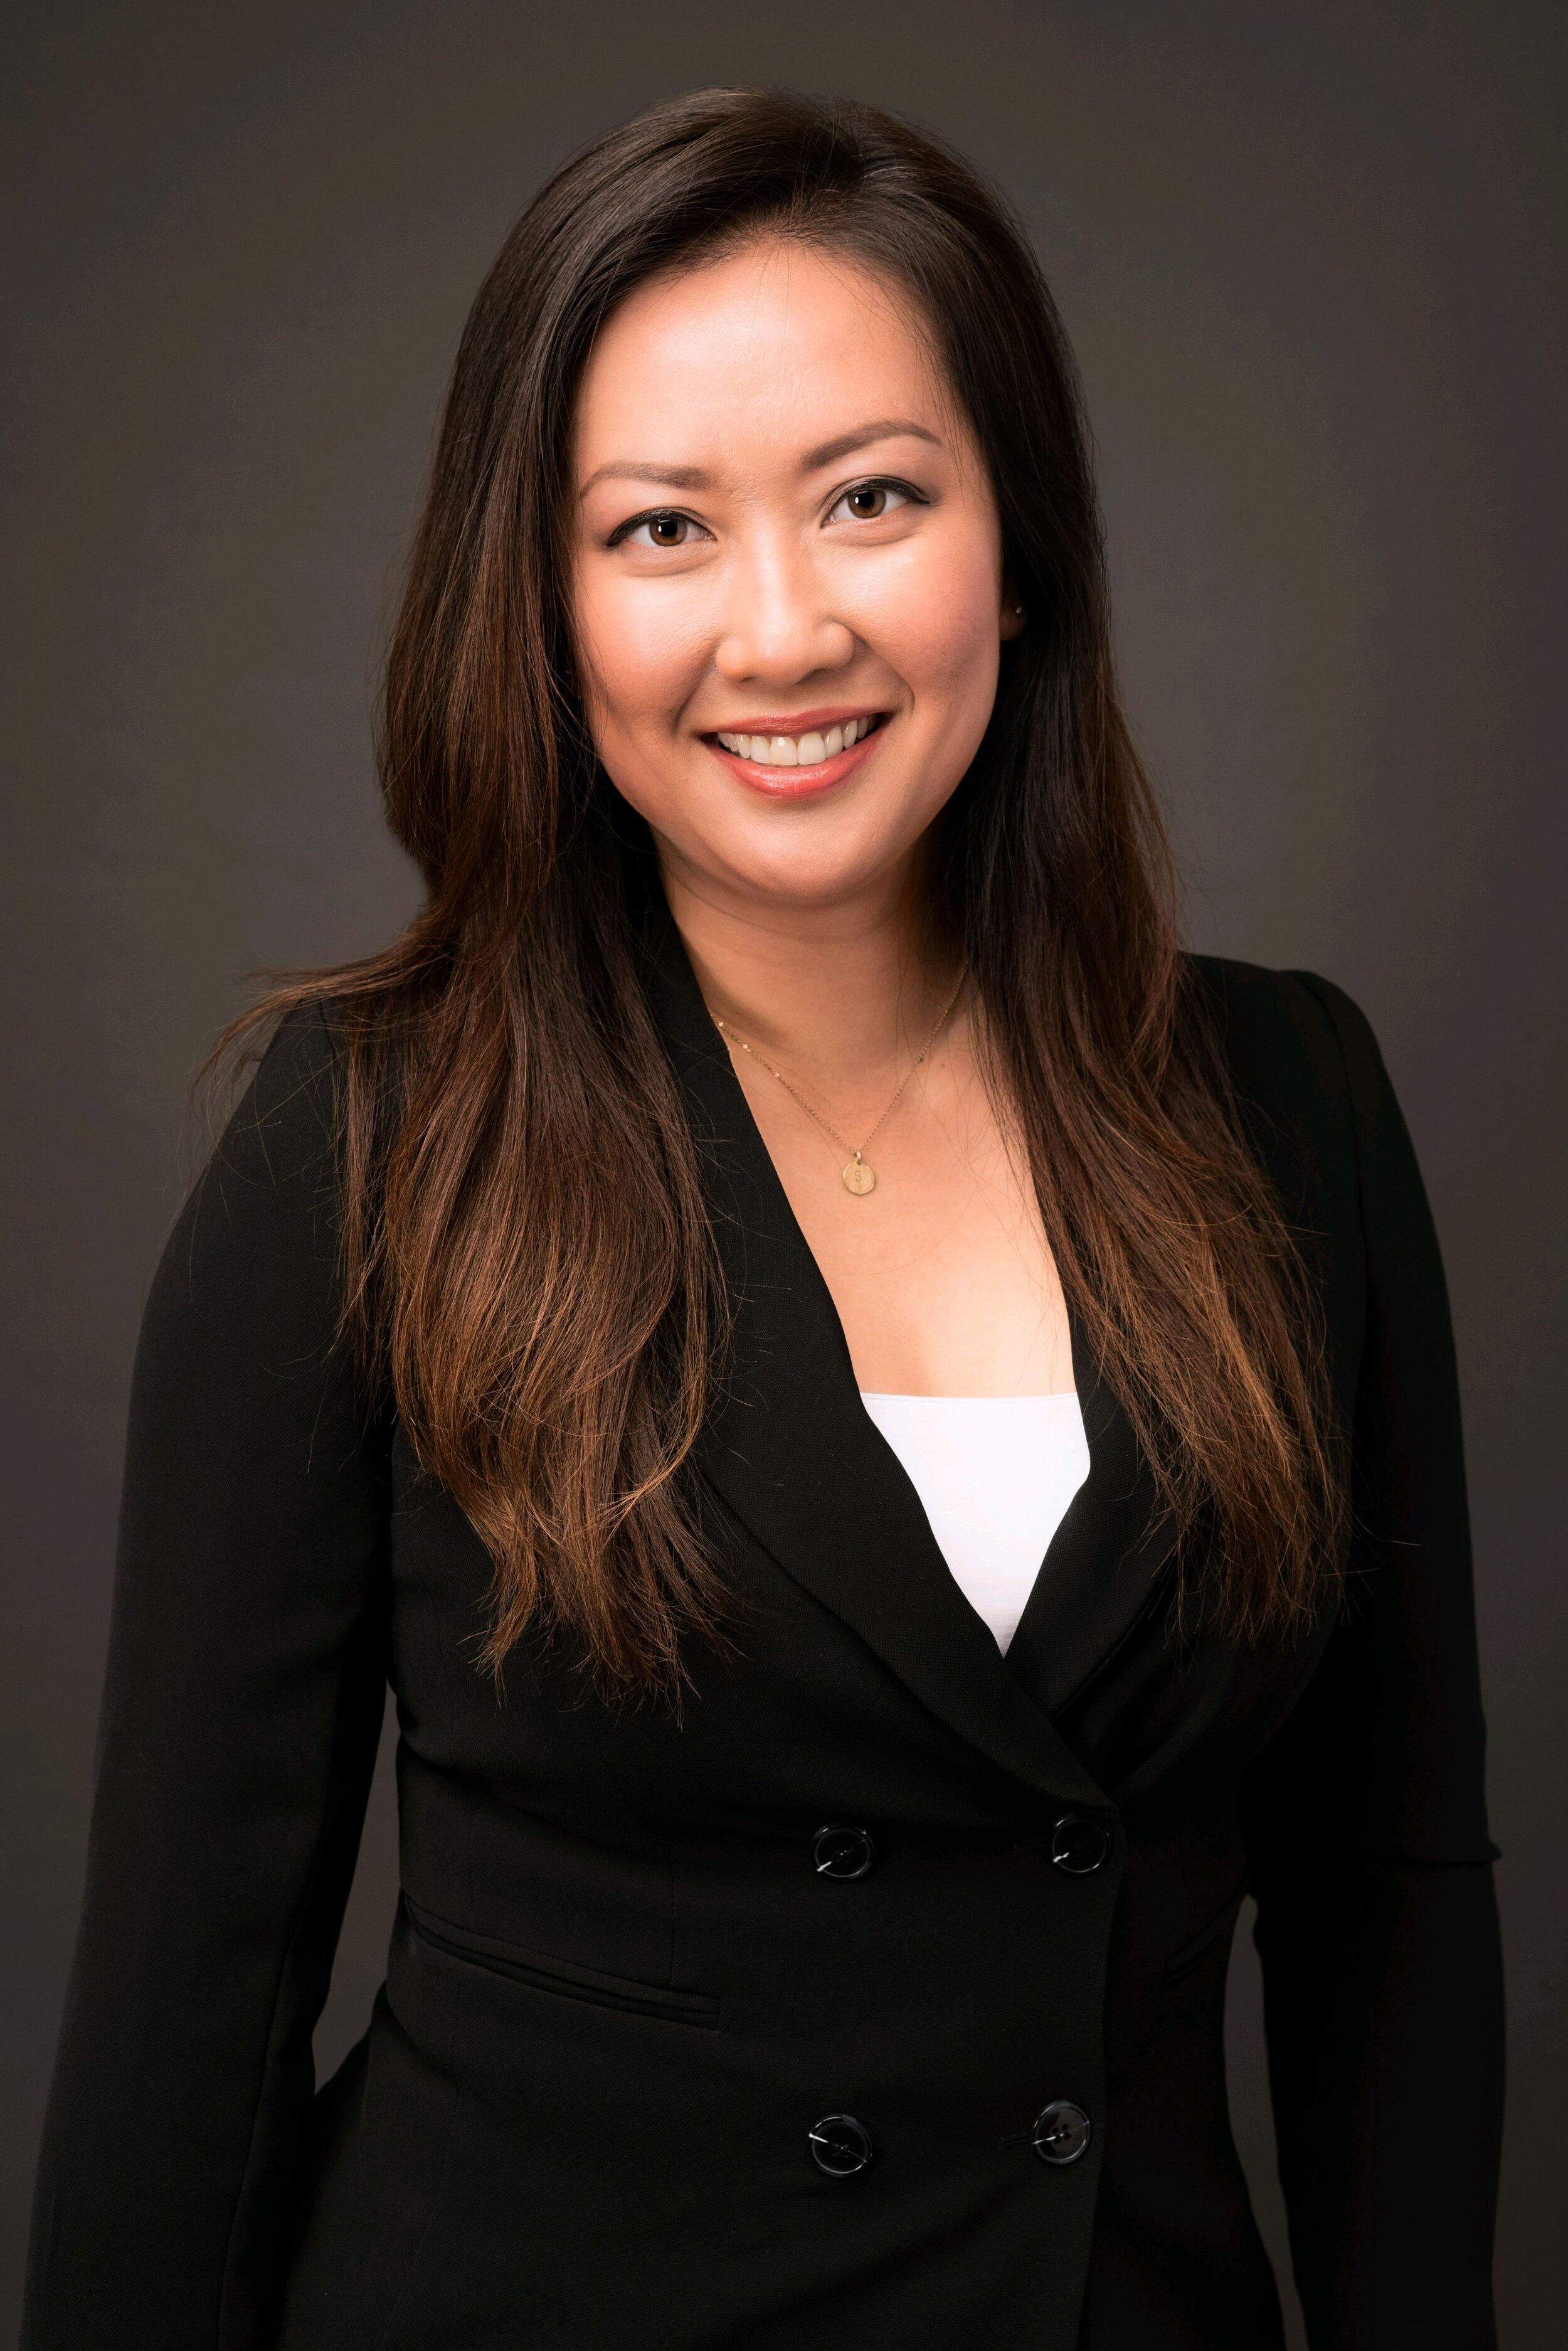 Susan Vong, owner of Poxy Clinical at CIC Cambridge, provides UAT Plan development, project management, and consulting services to Sponsors leveraging IRT software to support their clinical trials.